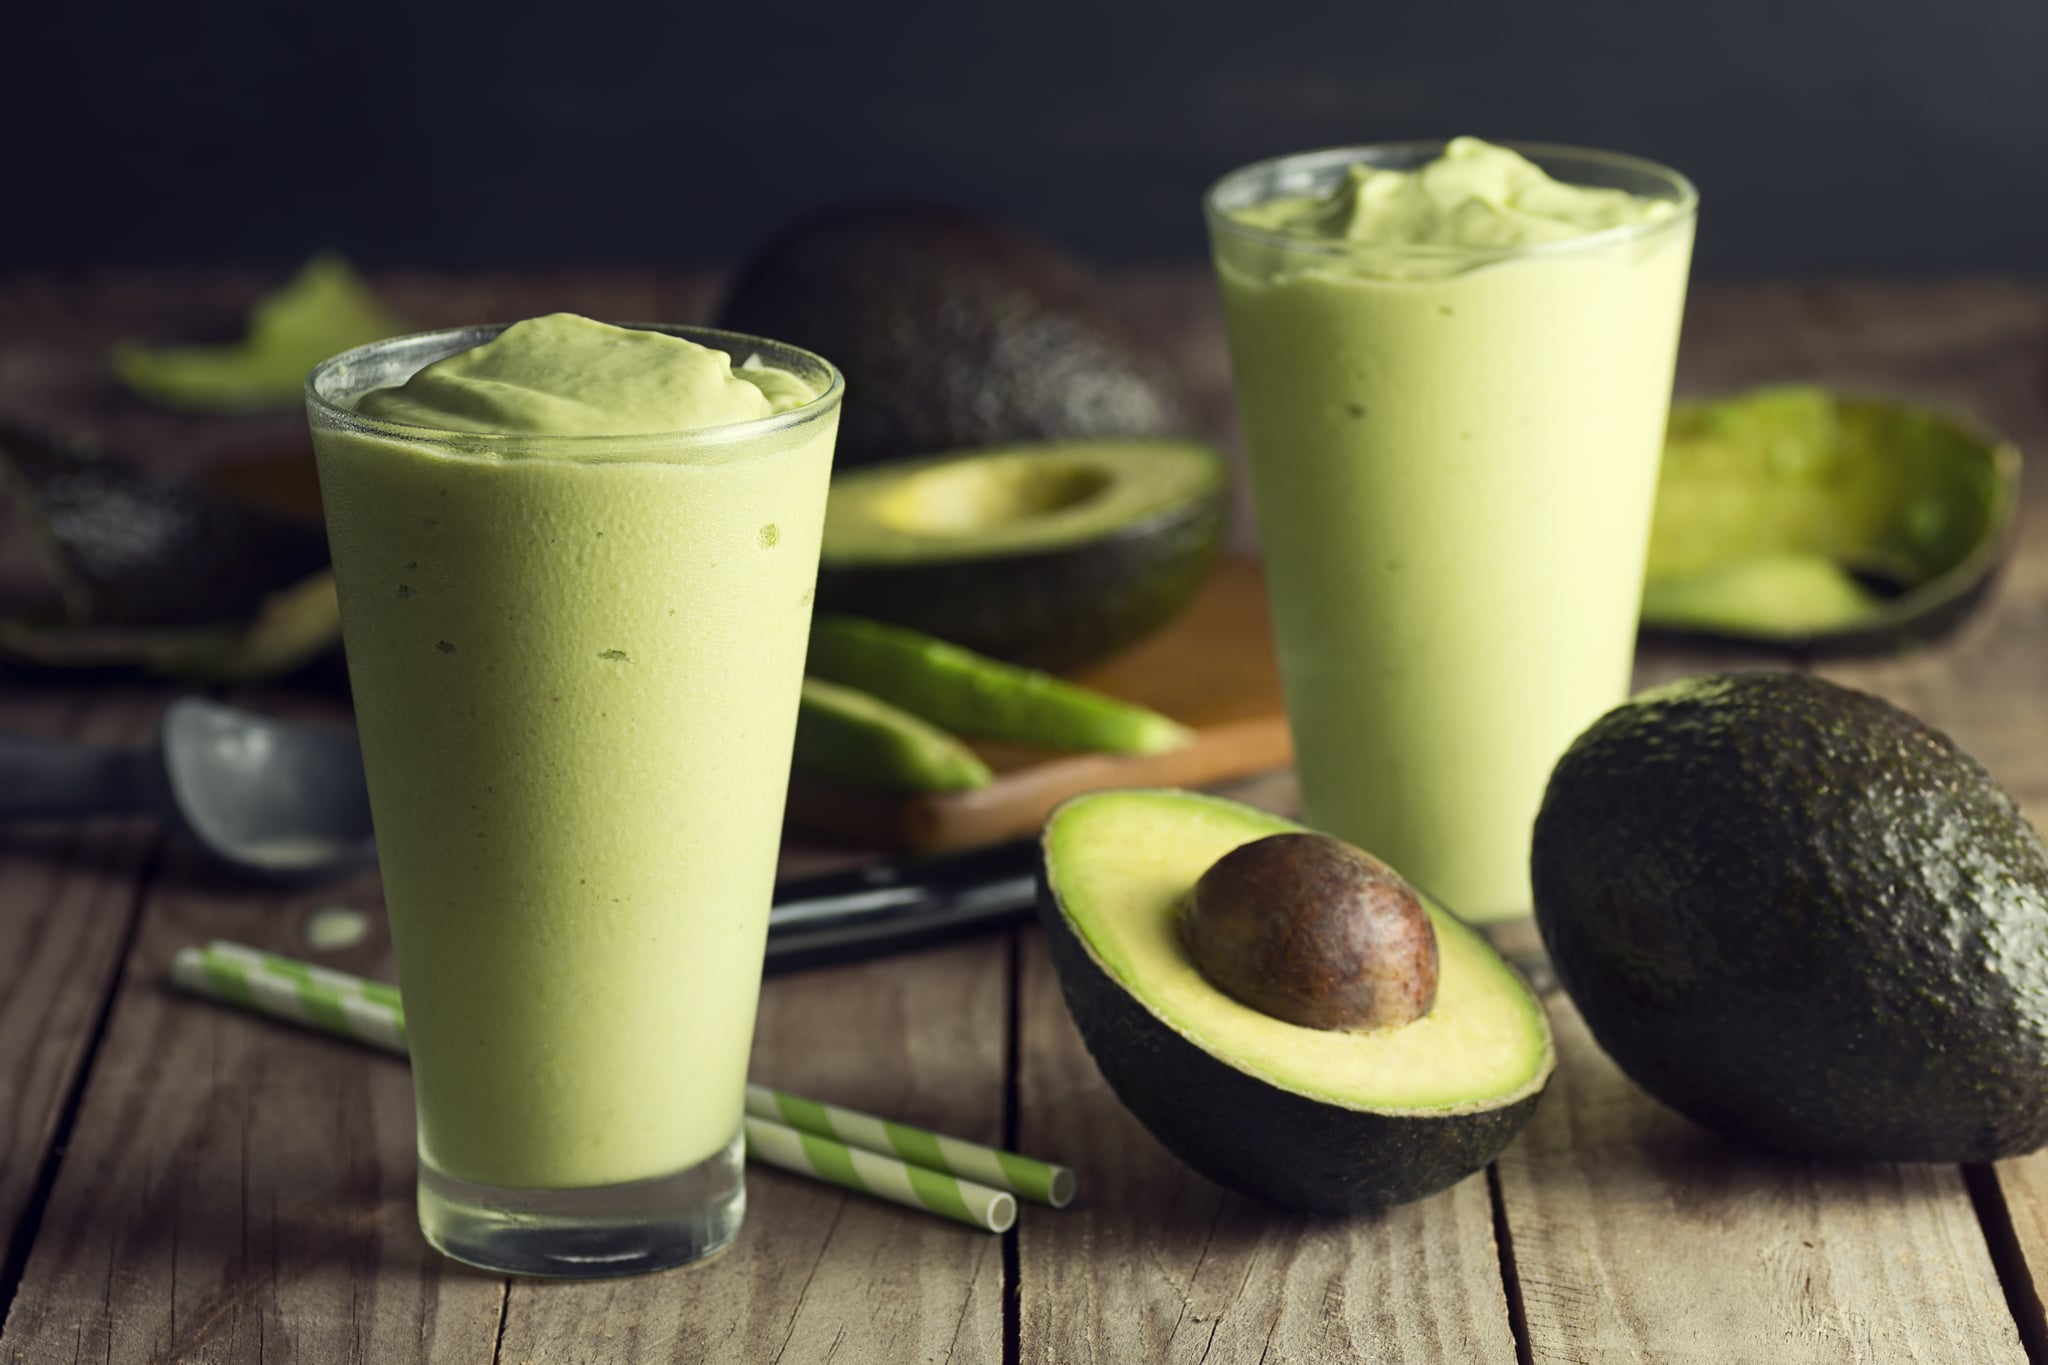 What Is The First Step Of Making The Avocado Juice From Karanganyar?